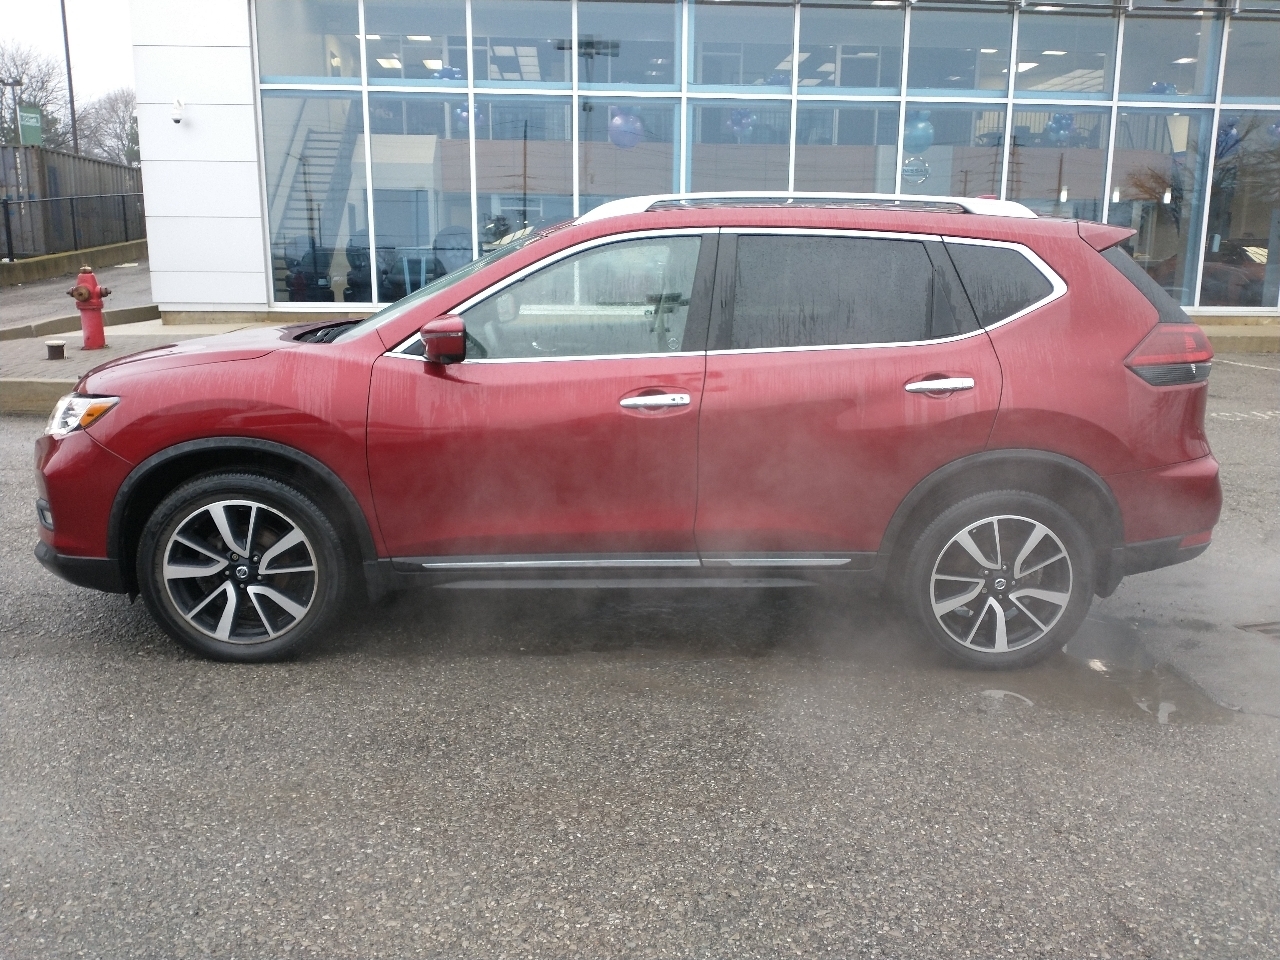 2020 Nissan Rogue S - AWD S